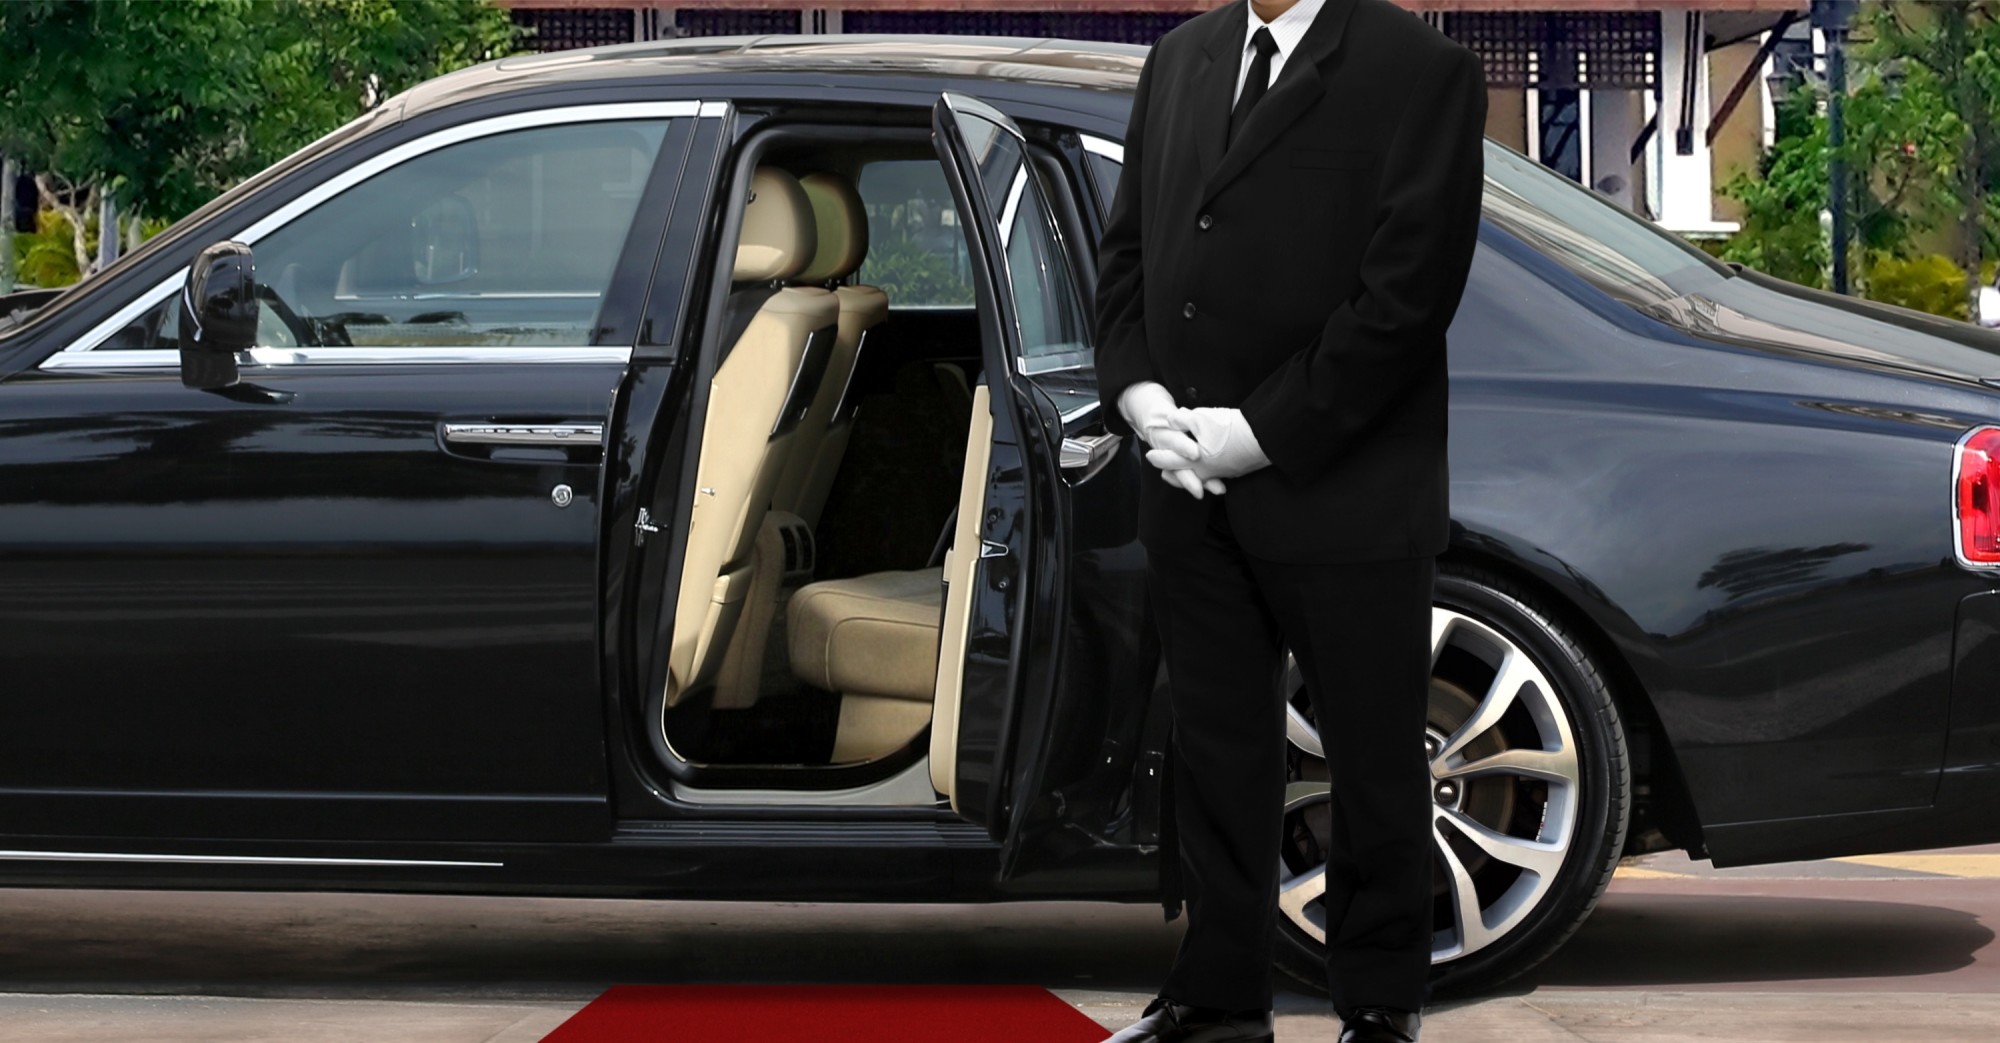 The Prestige and Convenience of Chauffeur Services in London